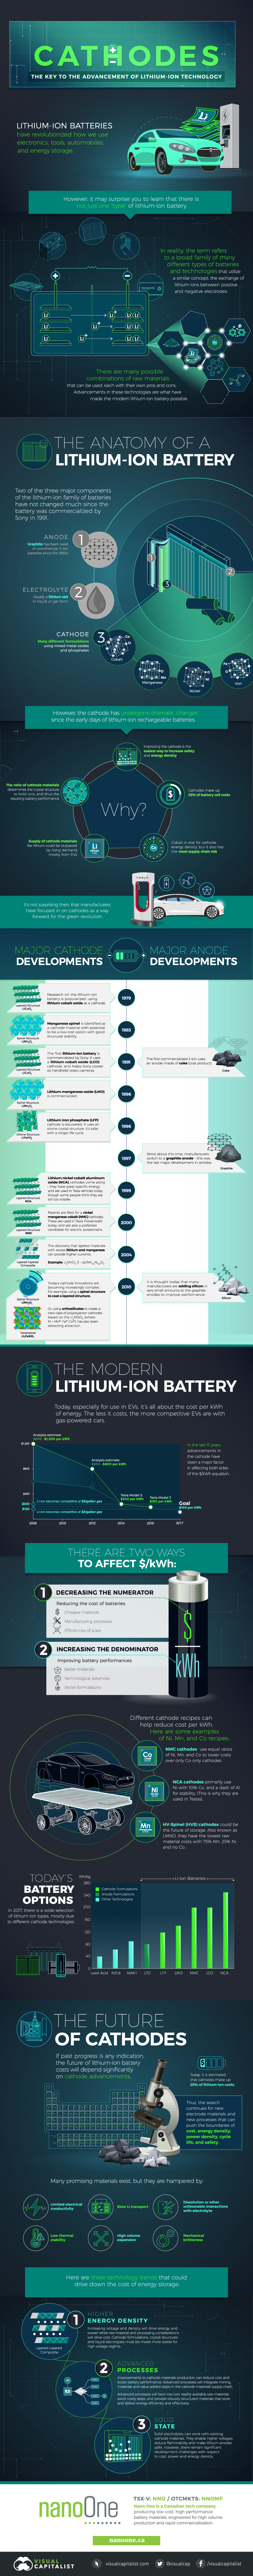 Cathodes: The Key to Advancing Lithium-Ion Technology